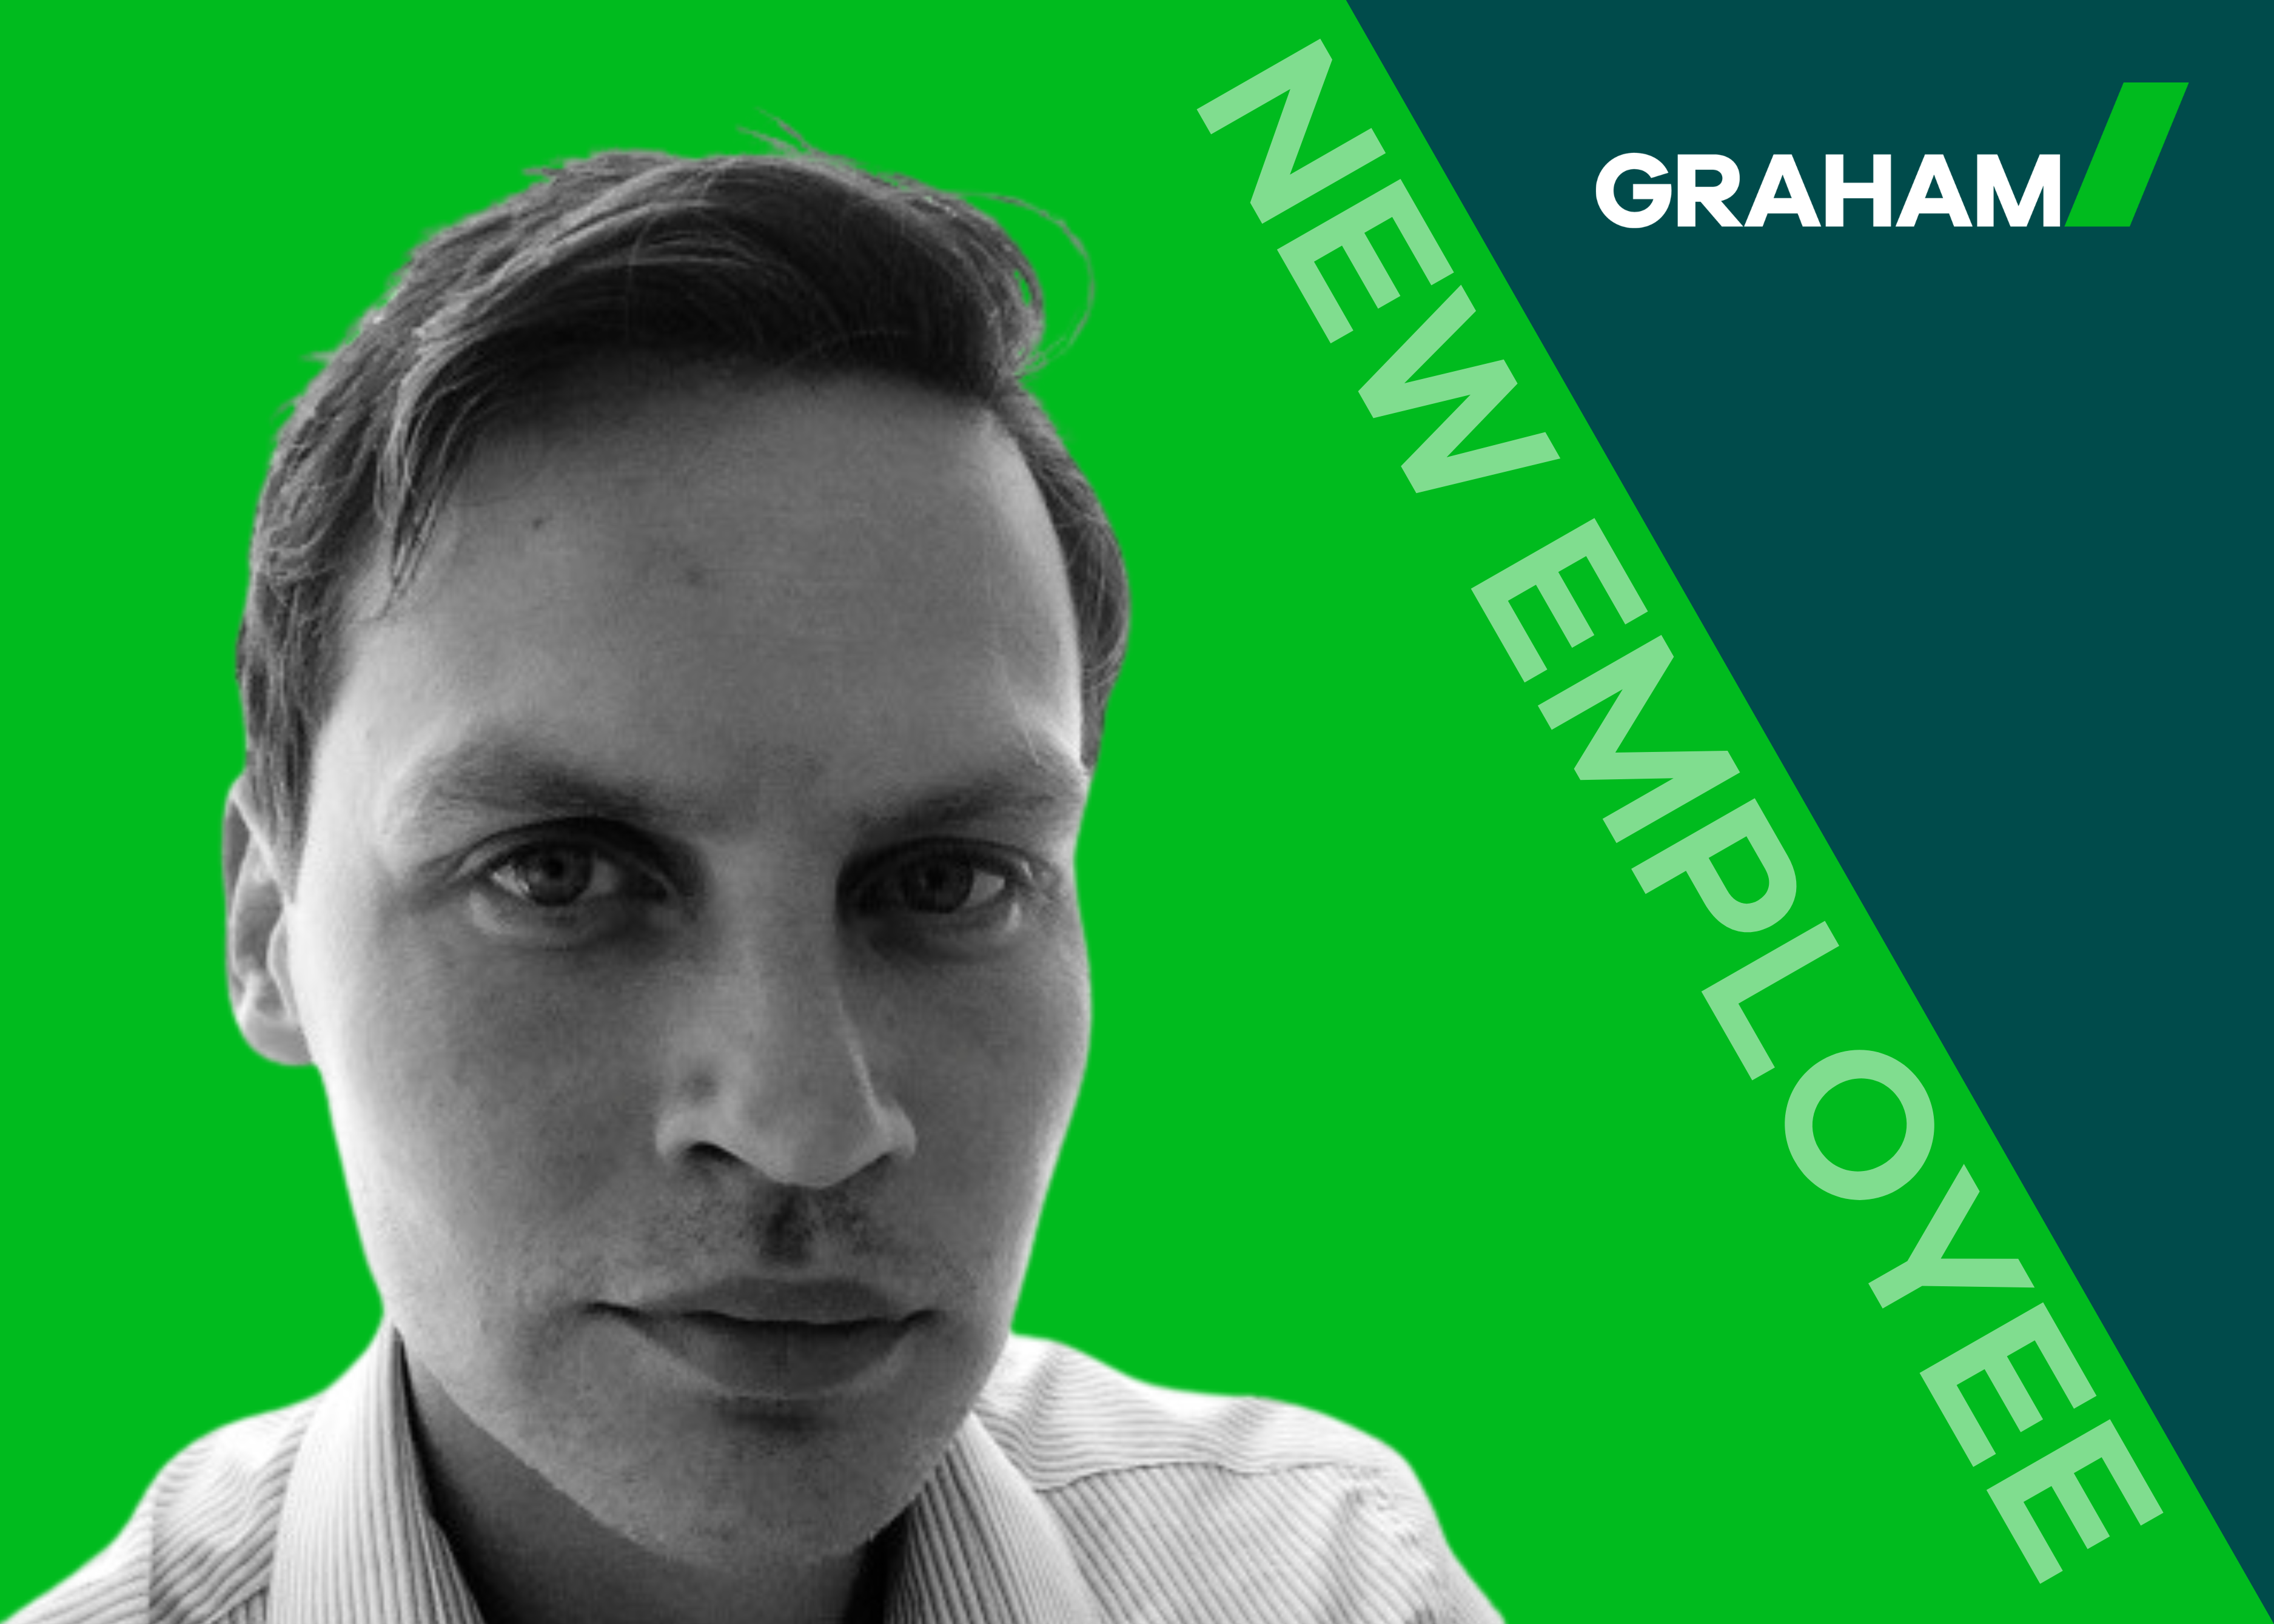 New London-based Project Site Manager joins GRAHAM image